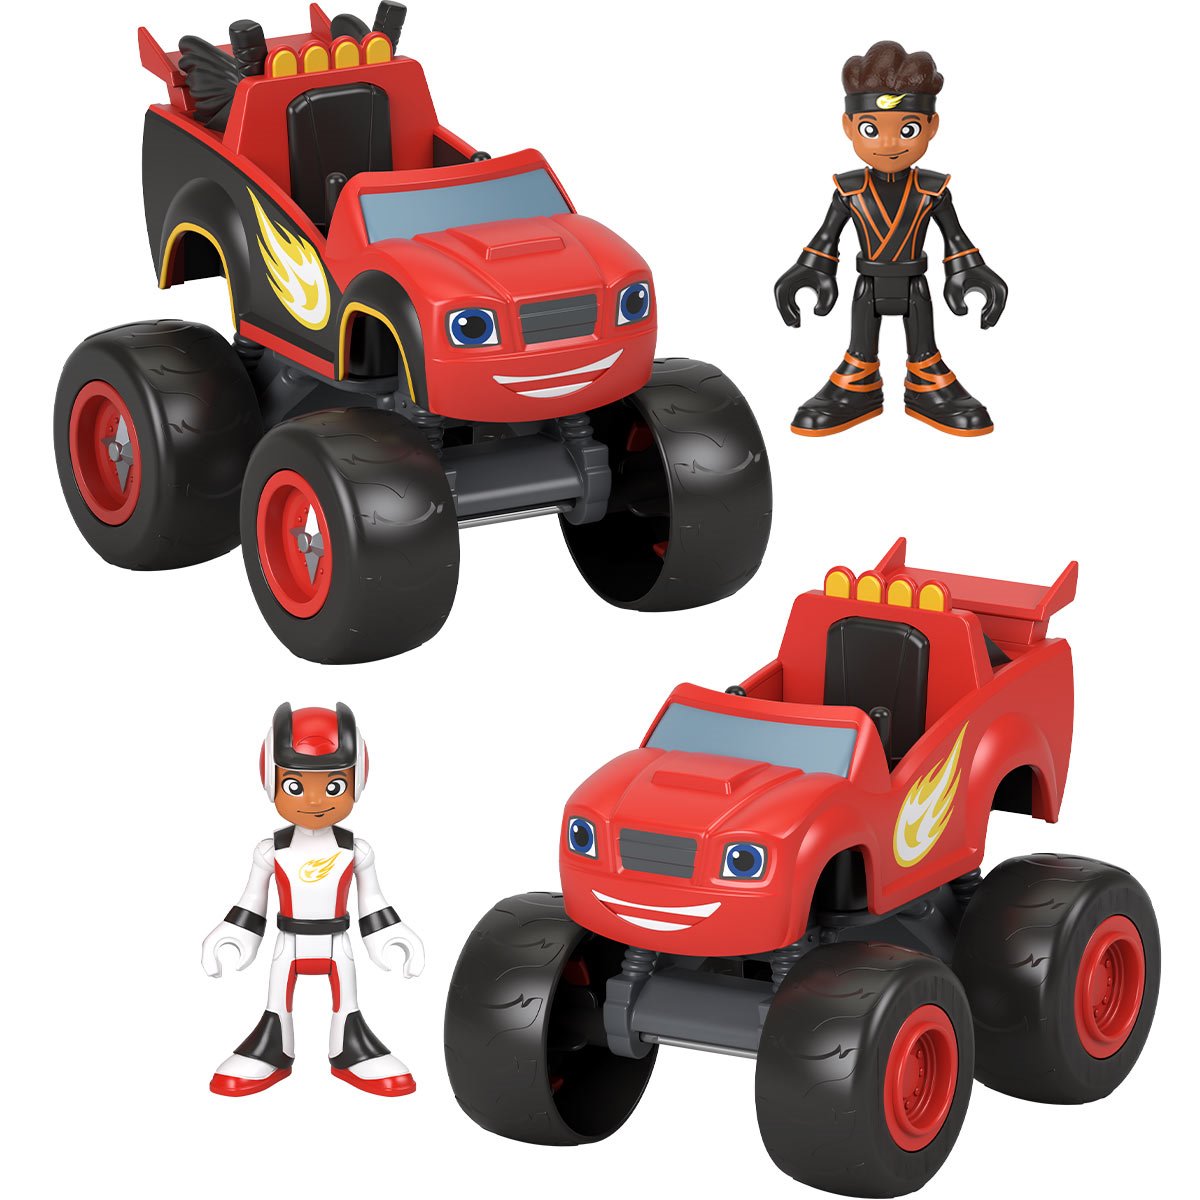 Blaze and the Monster Machines Feature Vehicle Set Case of 2